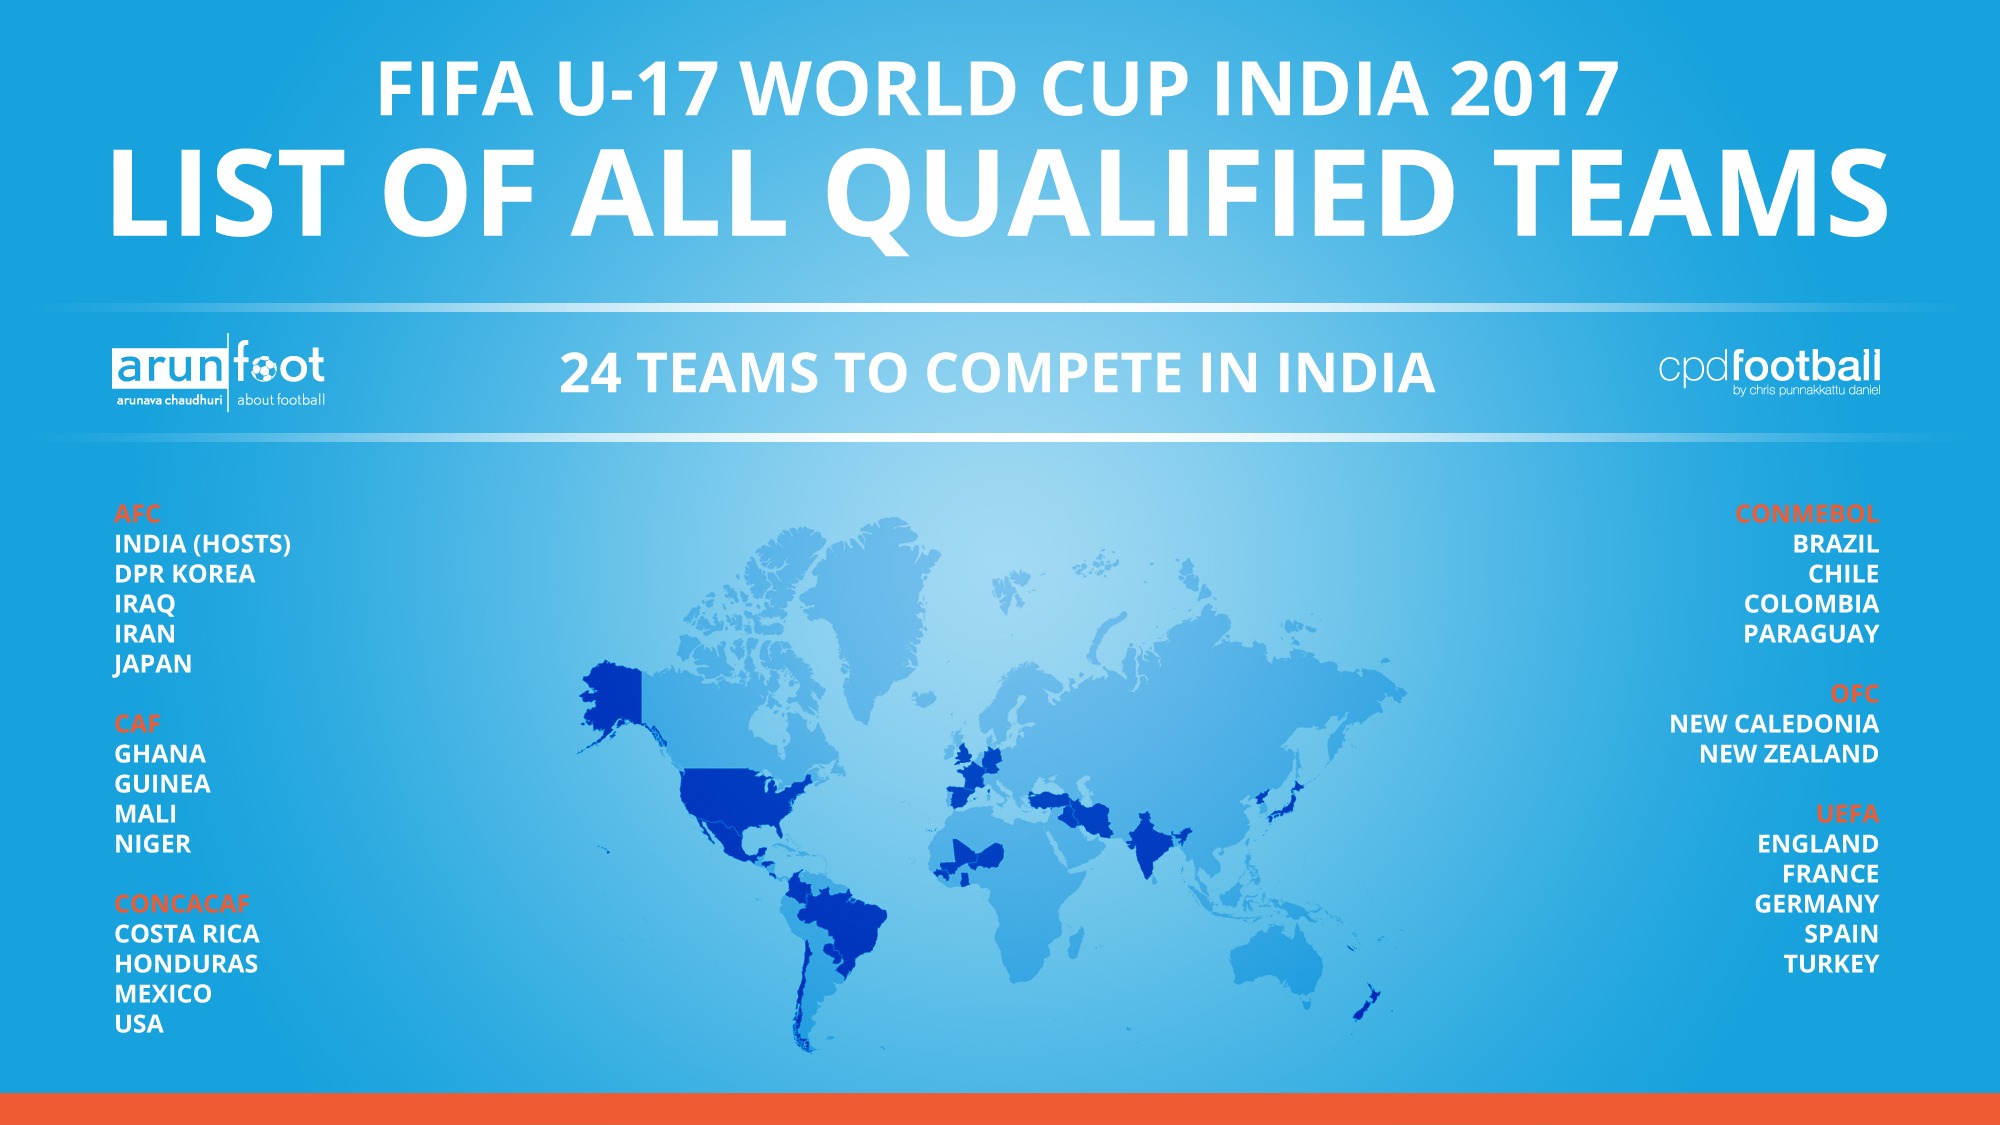 FIFA U-17 World Cup India 2017 - 24 teams to compete in India